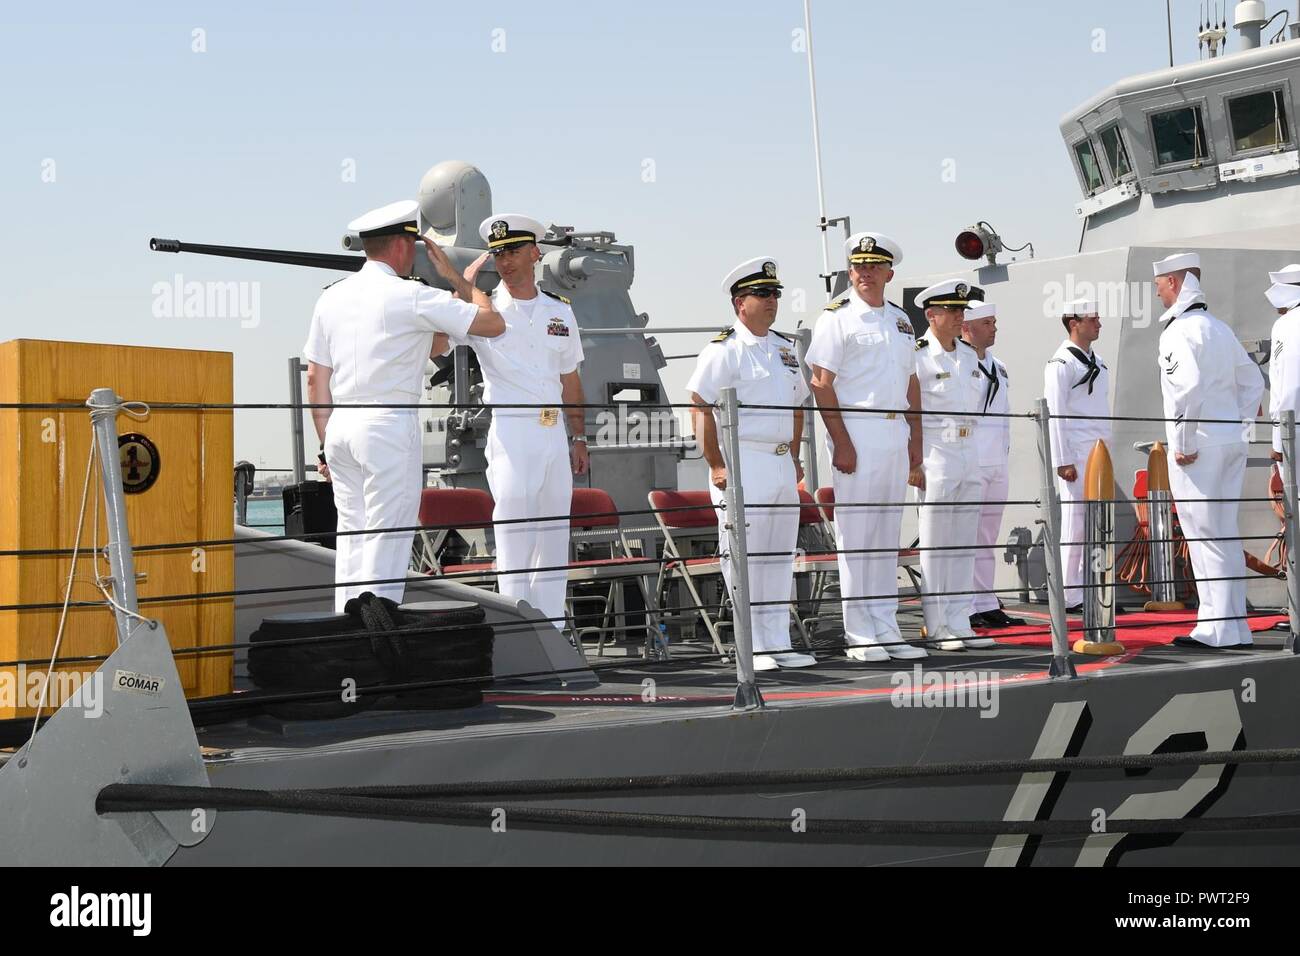 MANAMA, Bahrain (June 27, 2017) From left, Lt. Cmdr. Timothy Yuhas, a native of Cave Creek, Arizona and former commanding officer of the Cyclone-class coastal patrol ship USS Thunderbolt (PC 12), salutes Lt. Cmdr. Michael T. McArawas, a native of Erie, Pennsylvania and current commanding officer, during a change of command ceremony held shipboard while pierside at Naval Support Activity Bahrain. Thunderbolt is one of 10 PCs forward deployed to Manama, Bahrain, whose mission is coastal patrol and interdiction surveillance. ( Stock Photo